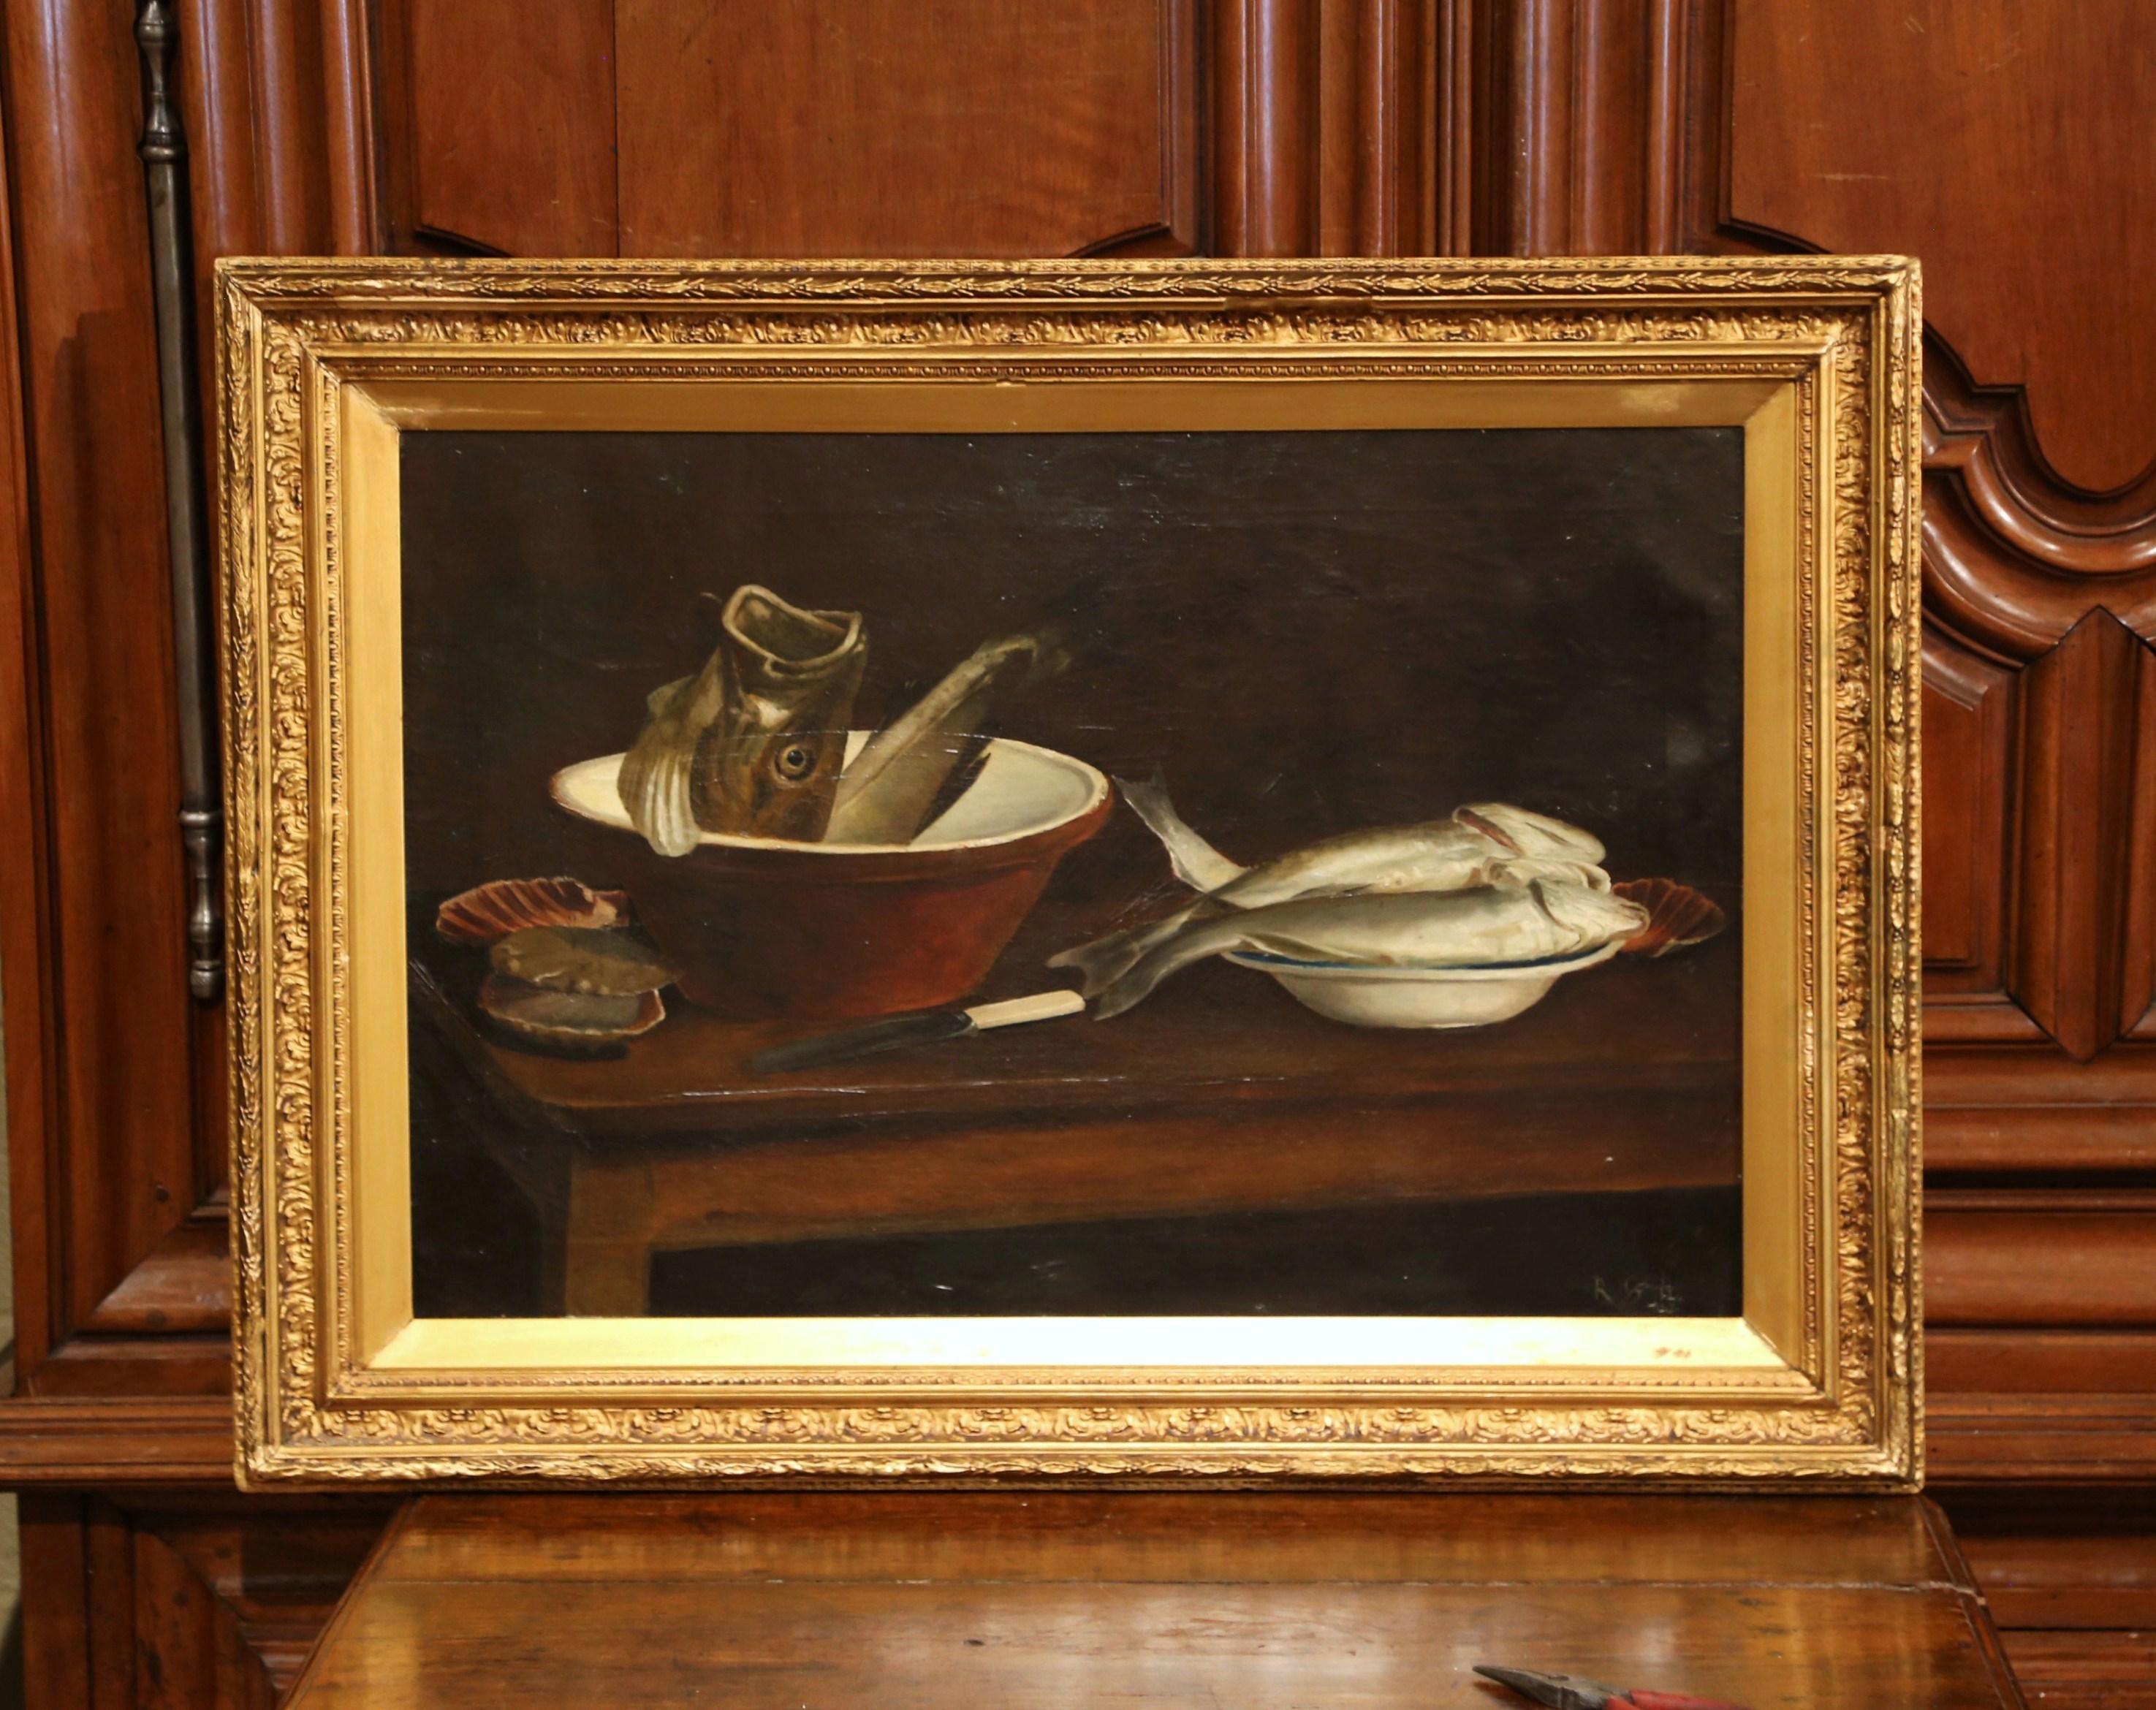 19th Century English Still Life Painting in Gilt Frame Signed and Dated 1847 For Sale 2